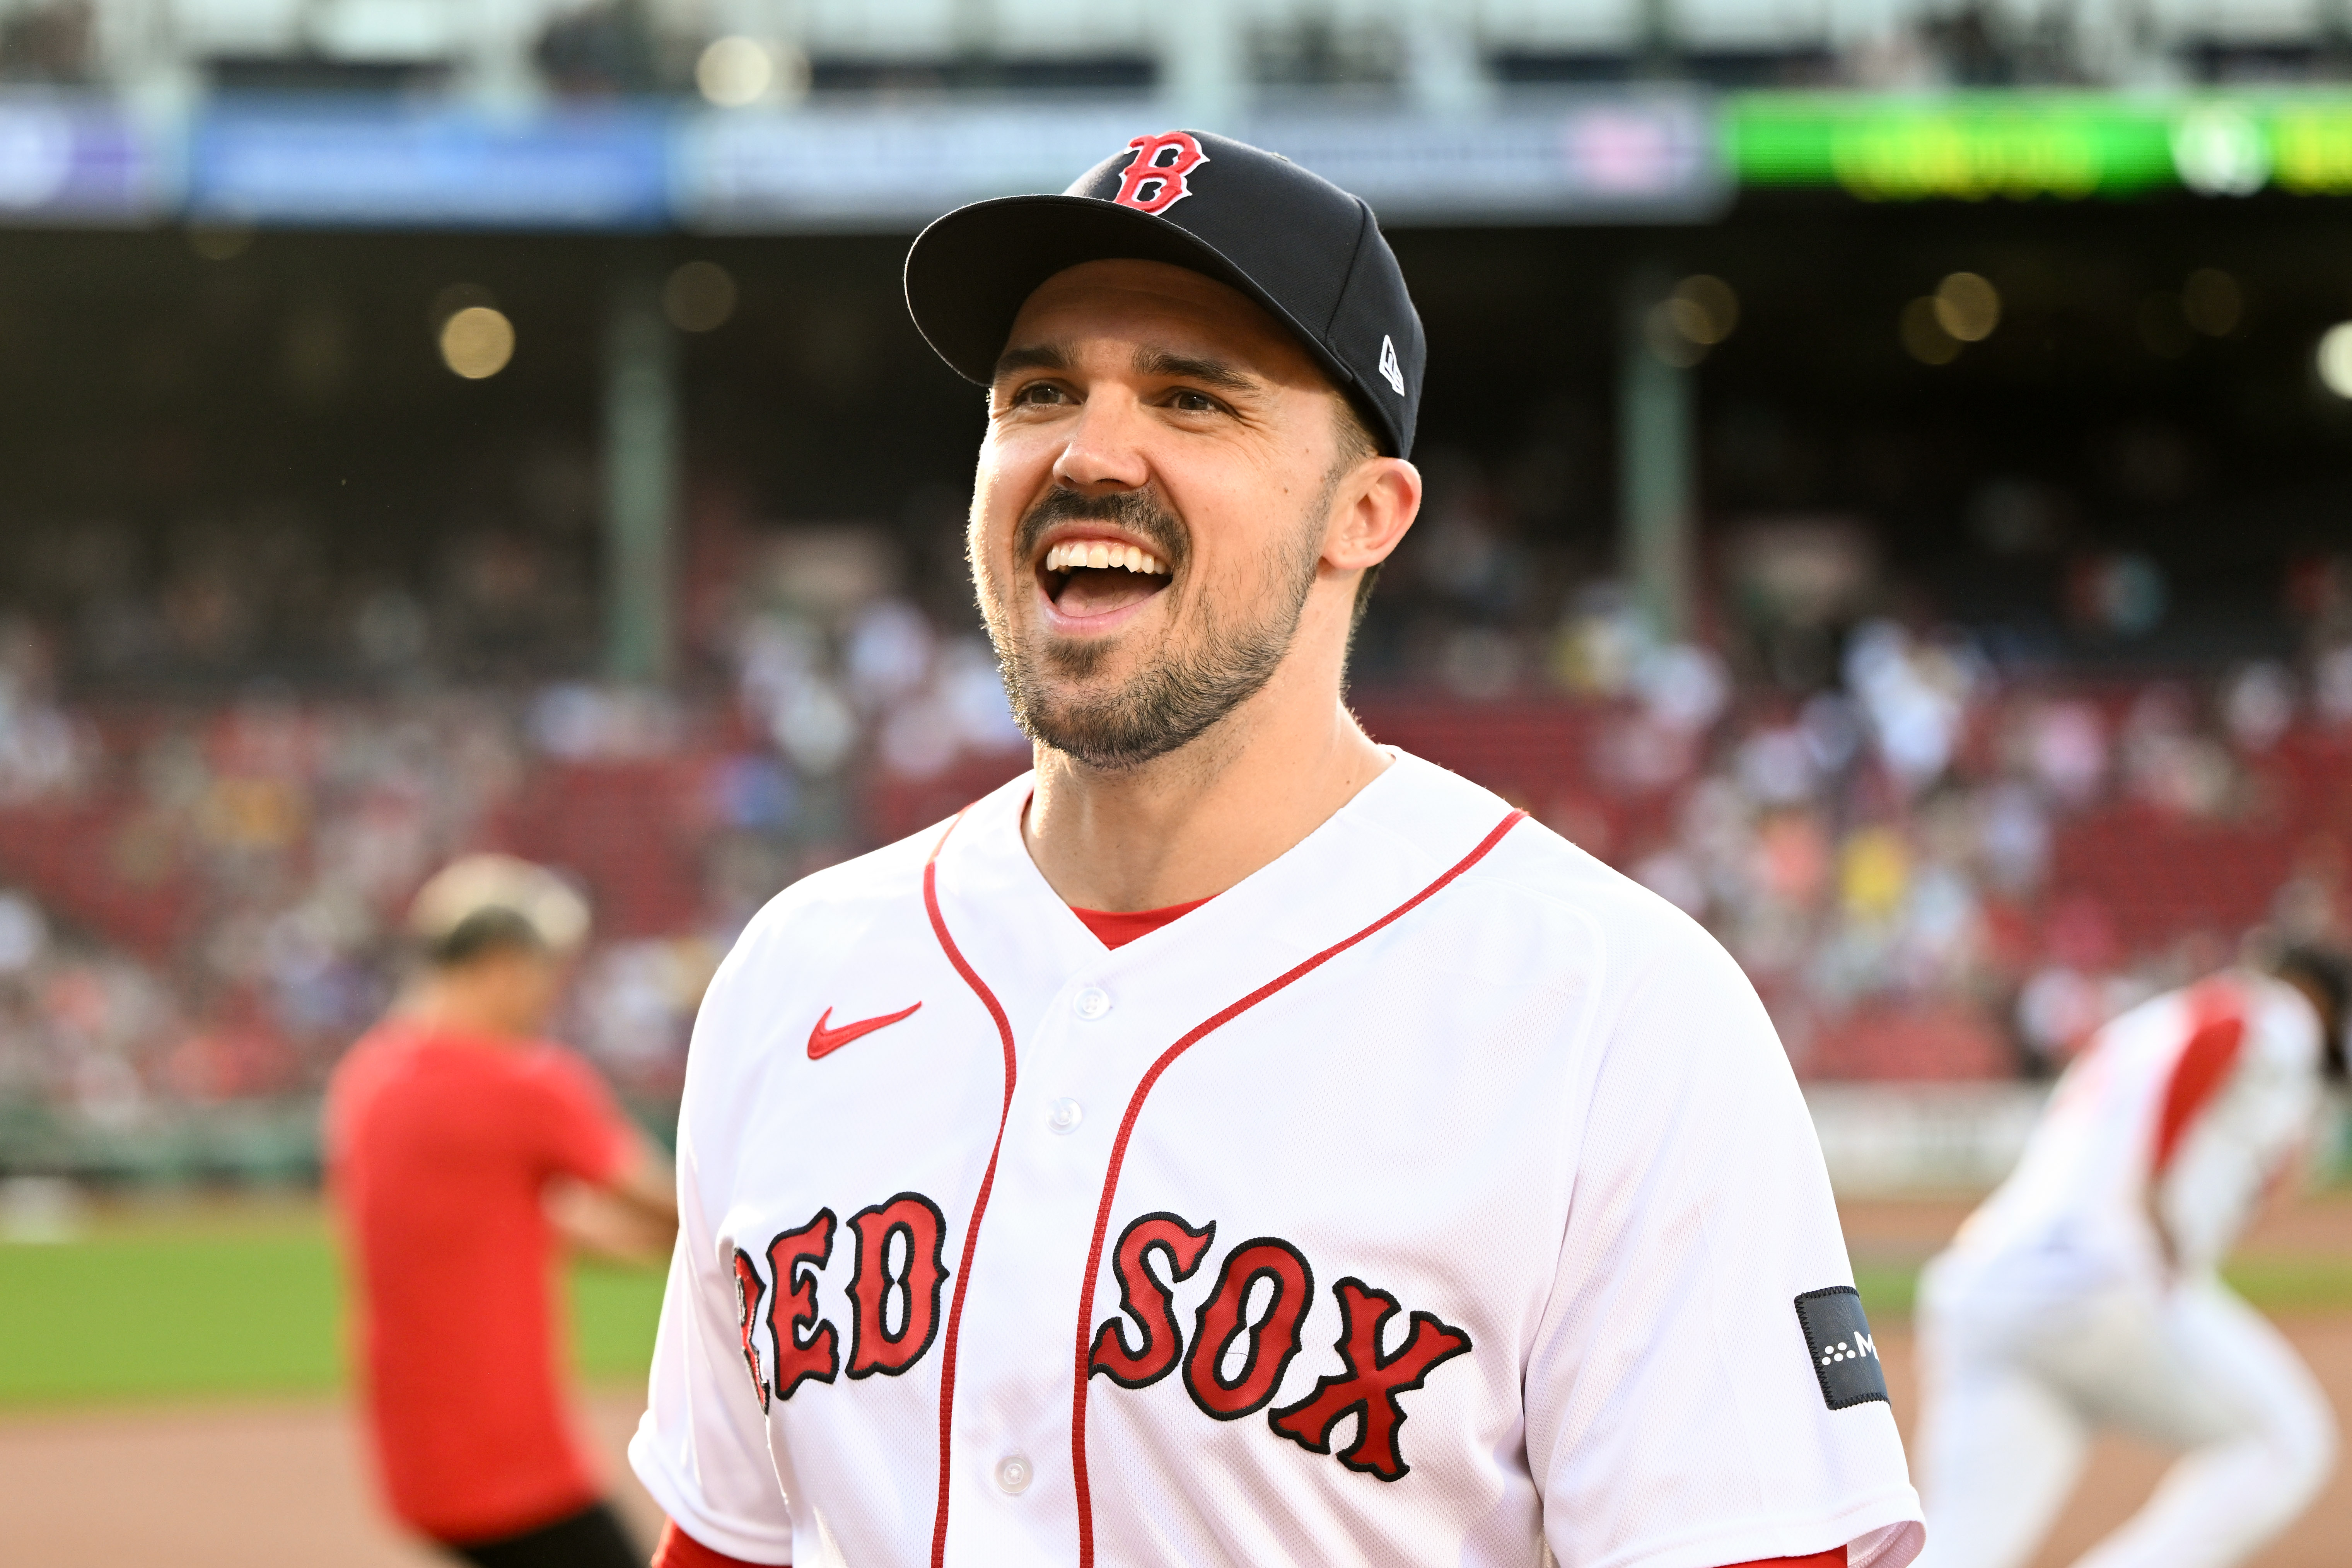 Red Sox to sign World Series winner Adam Duvall, reports say